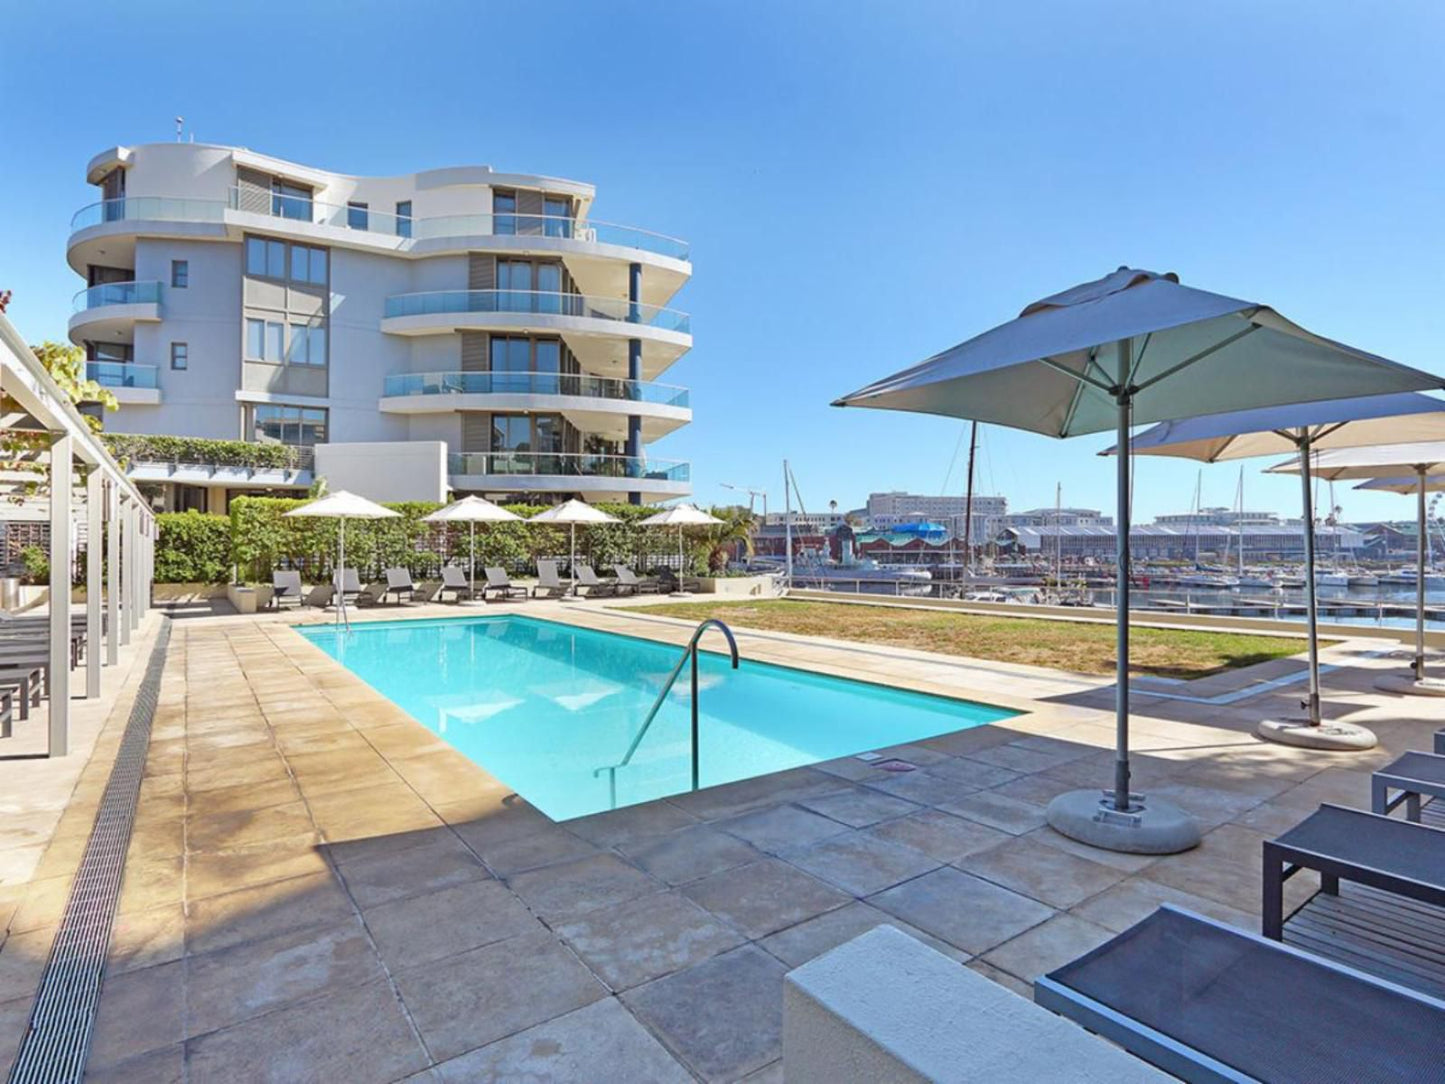 Waterfront Stays 102 V And A Waterfront Cape Town Western Cape South Africa Beach, Nature, Sand, Swimming Pool